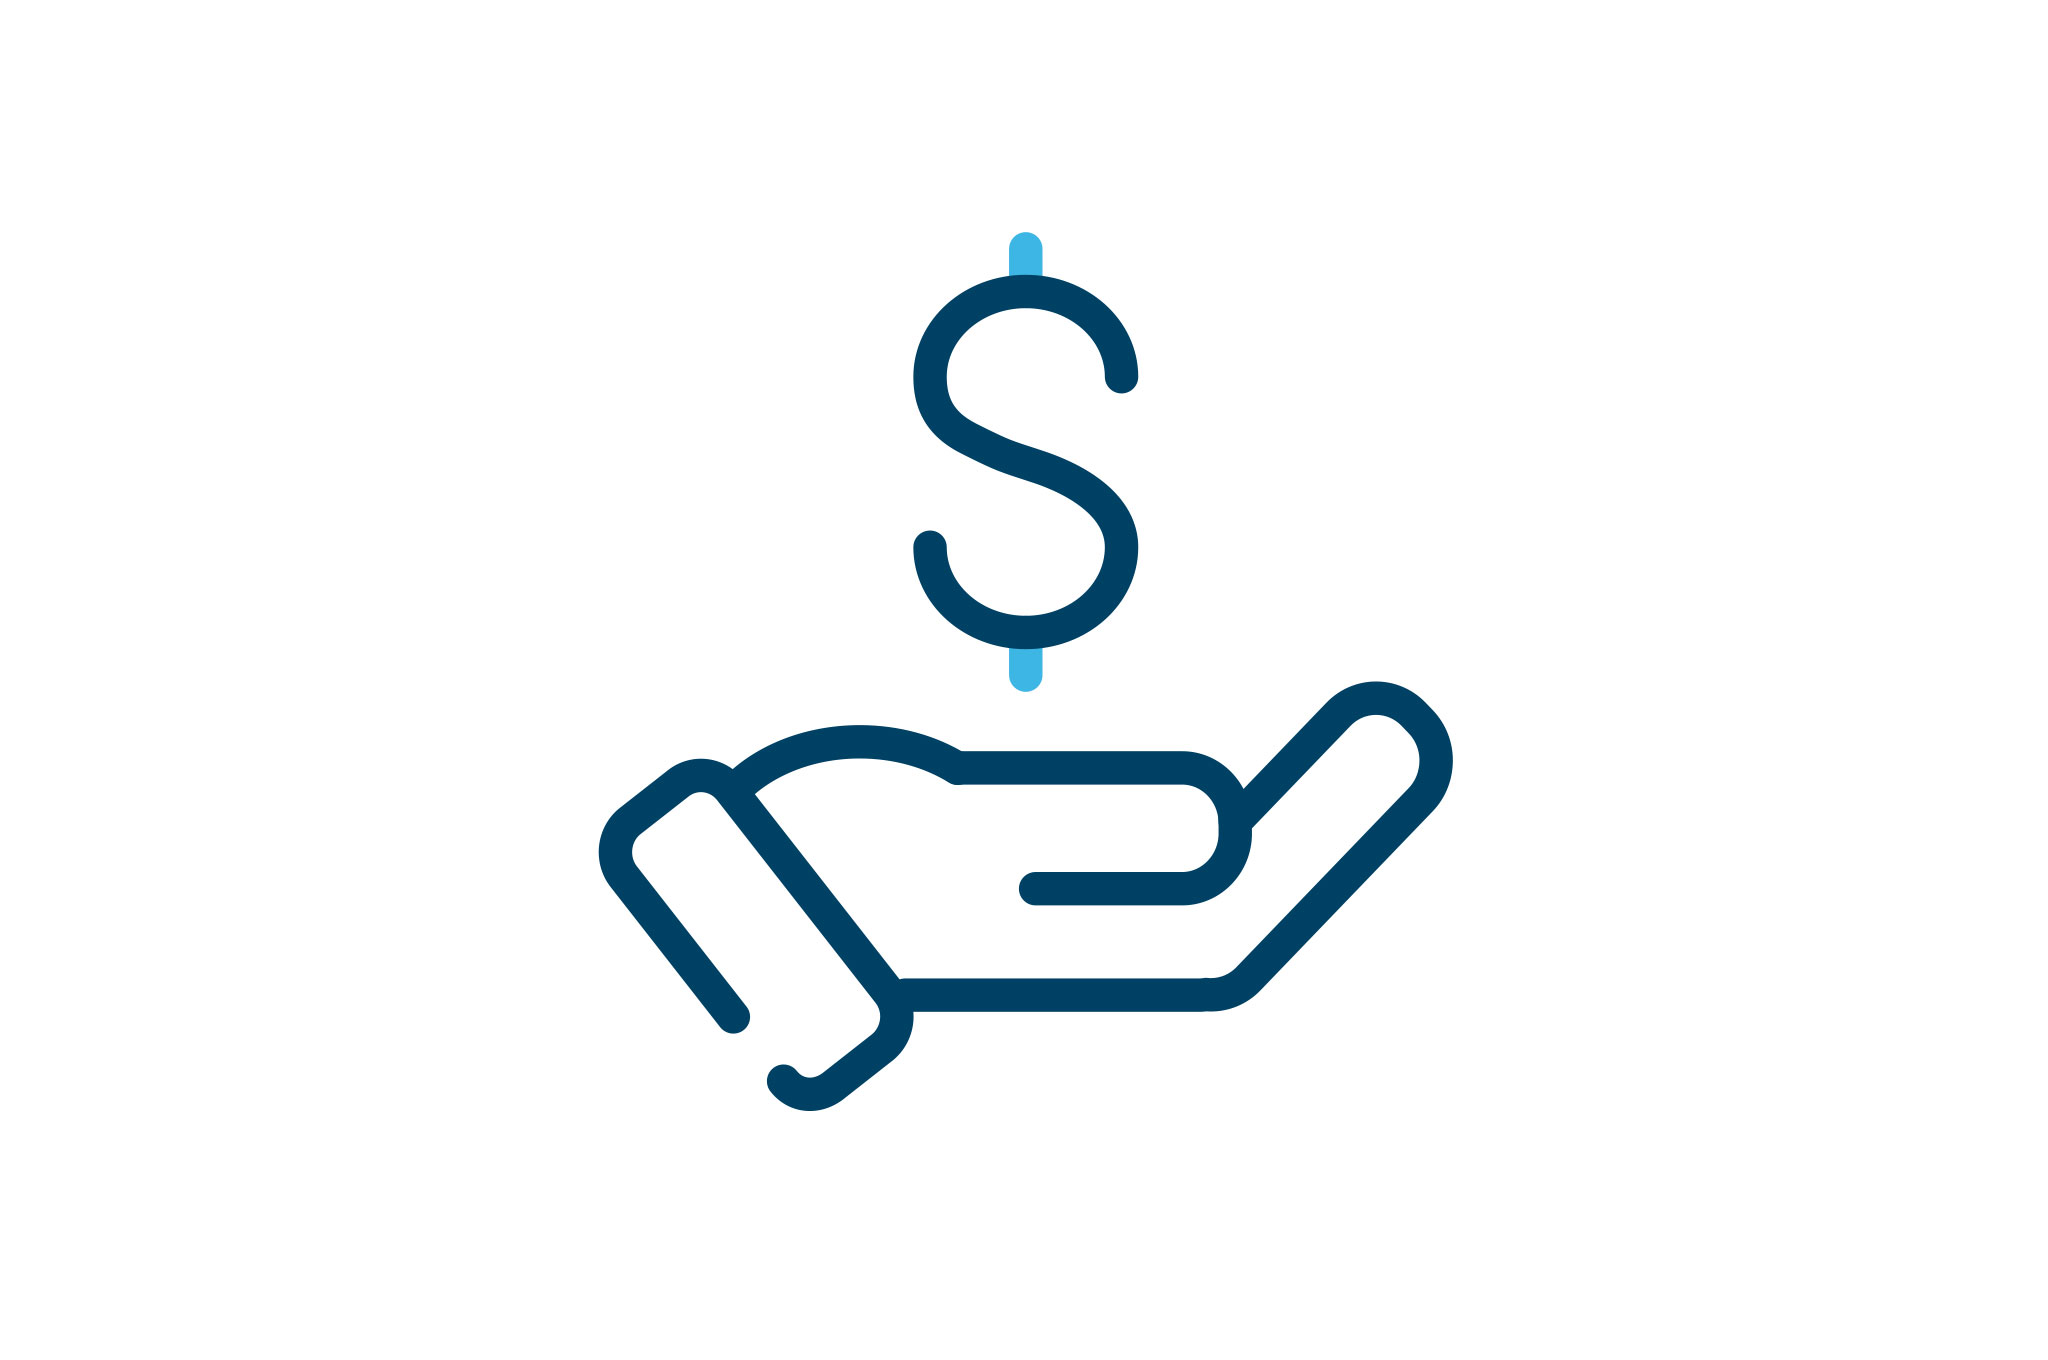 Dollar sign over a hand icon